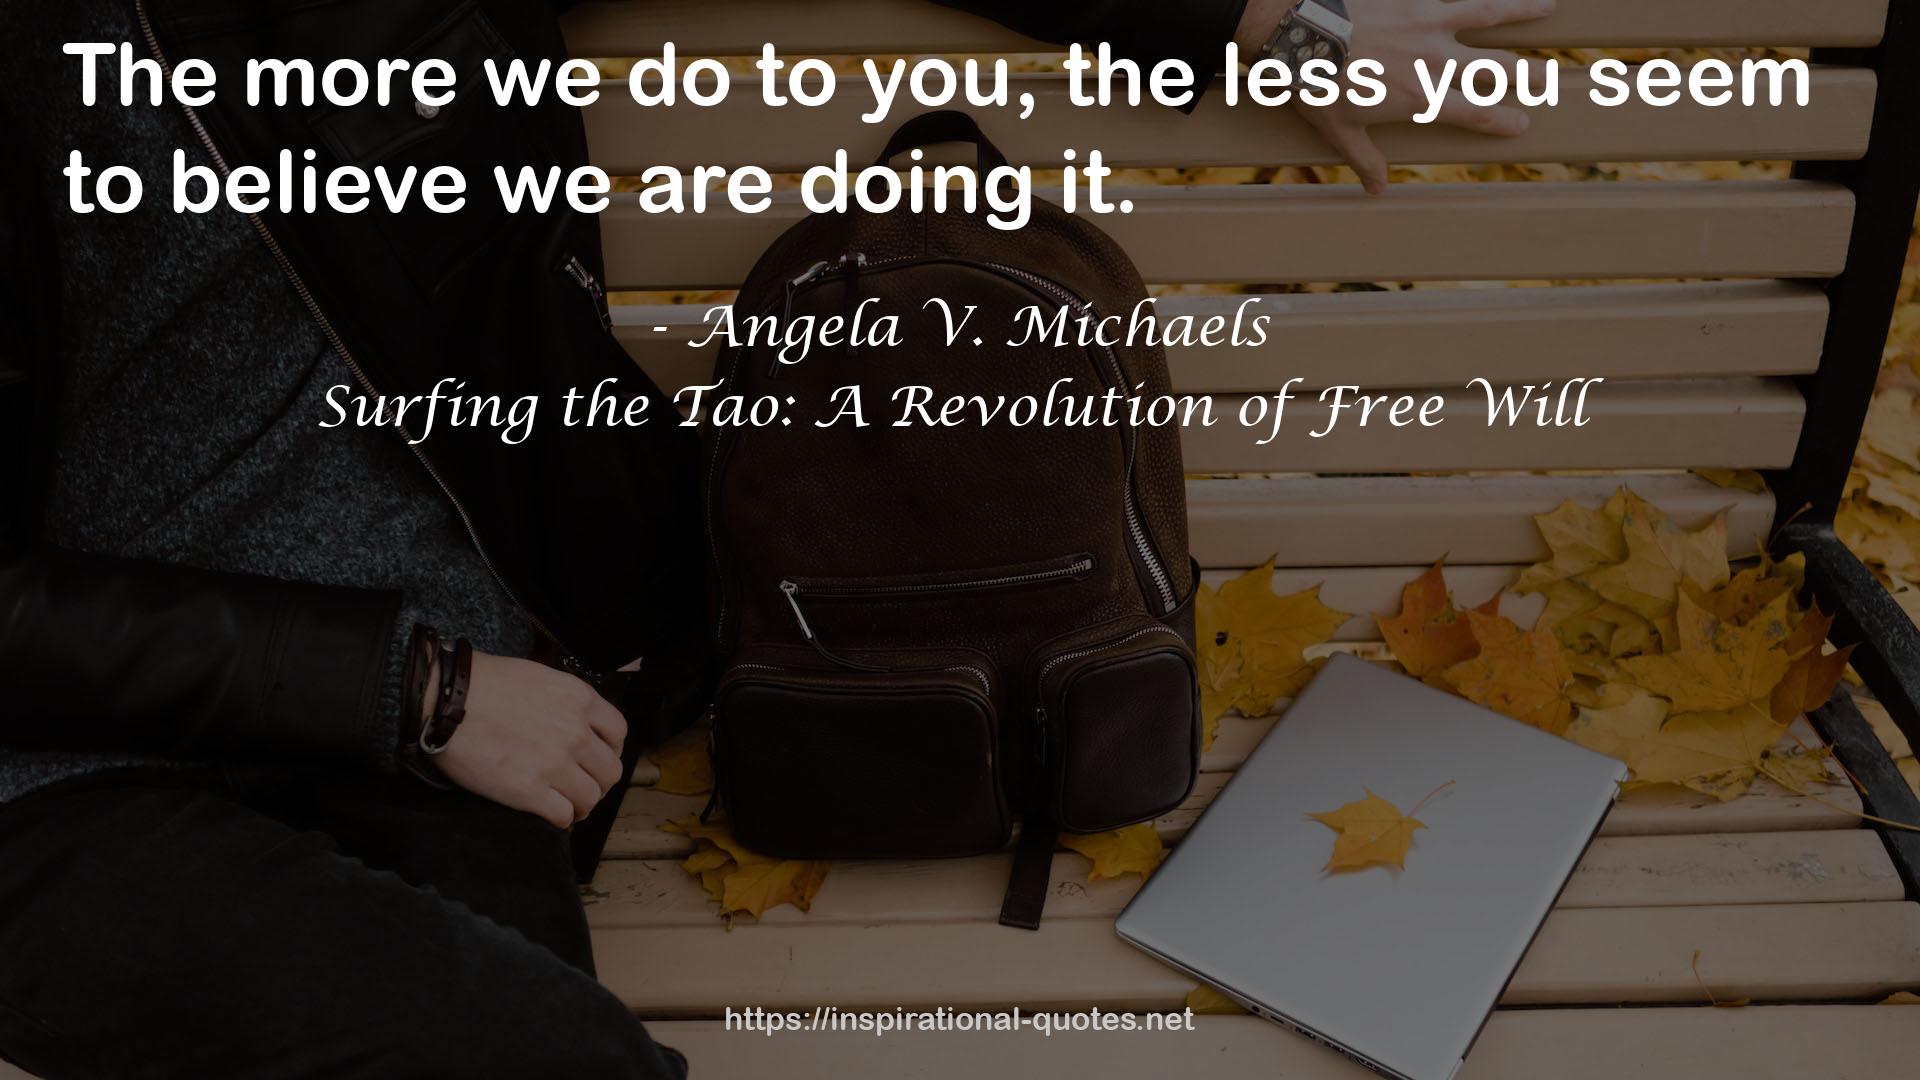 Surfing the Tao: A Revolution of Free Will QUOTES